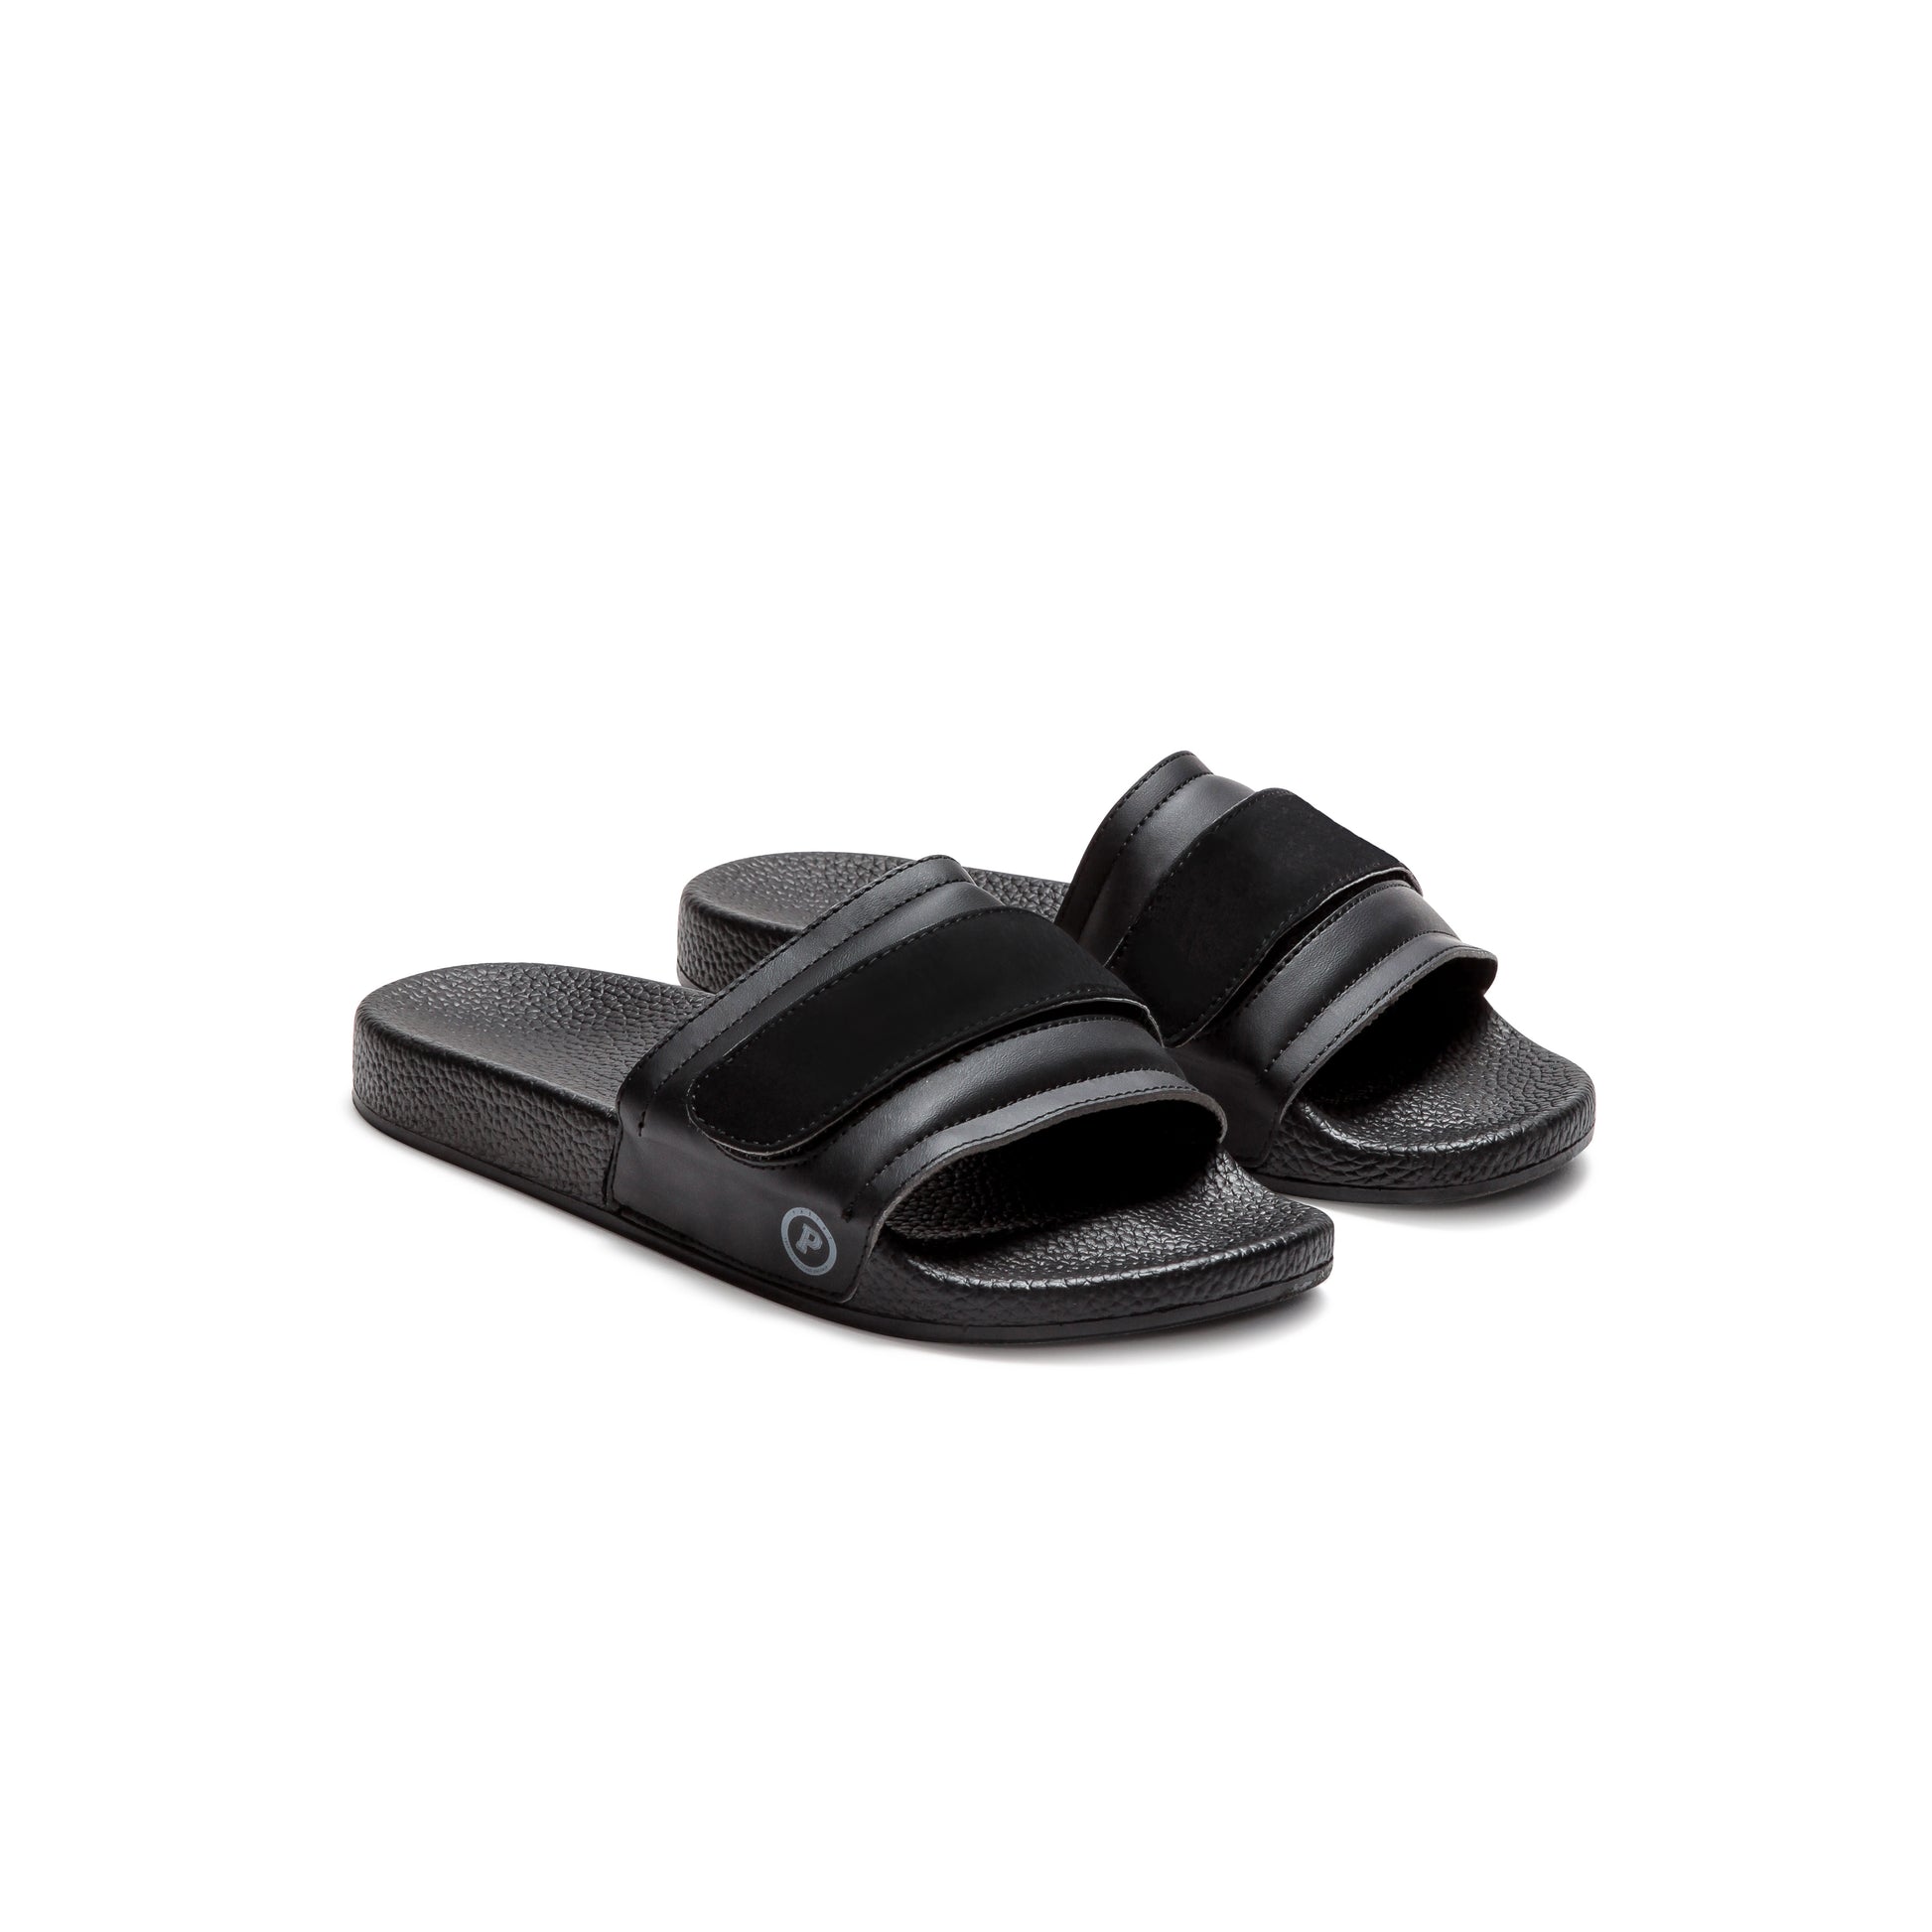 Pair of Pastry Recovery Slide in Black with customizable straps in 3 quarter view